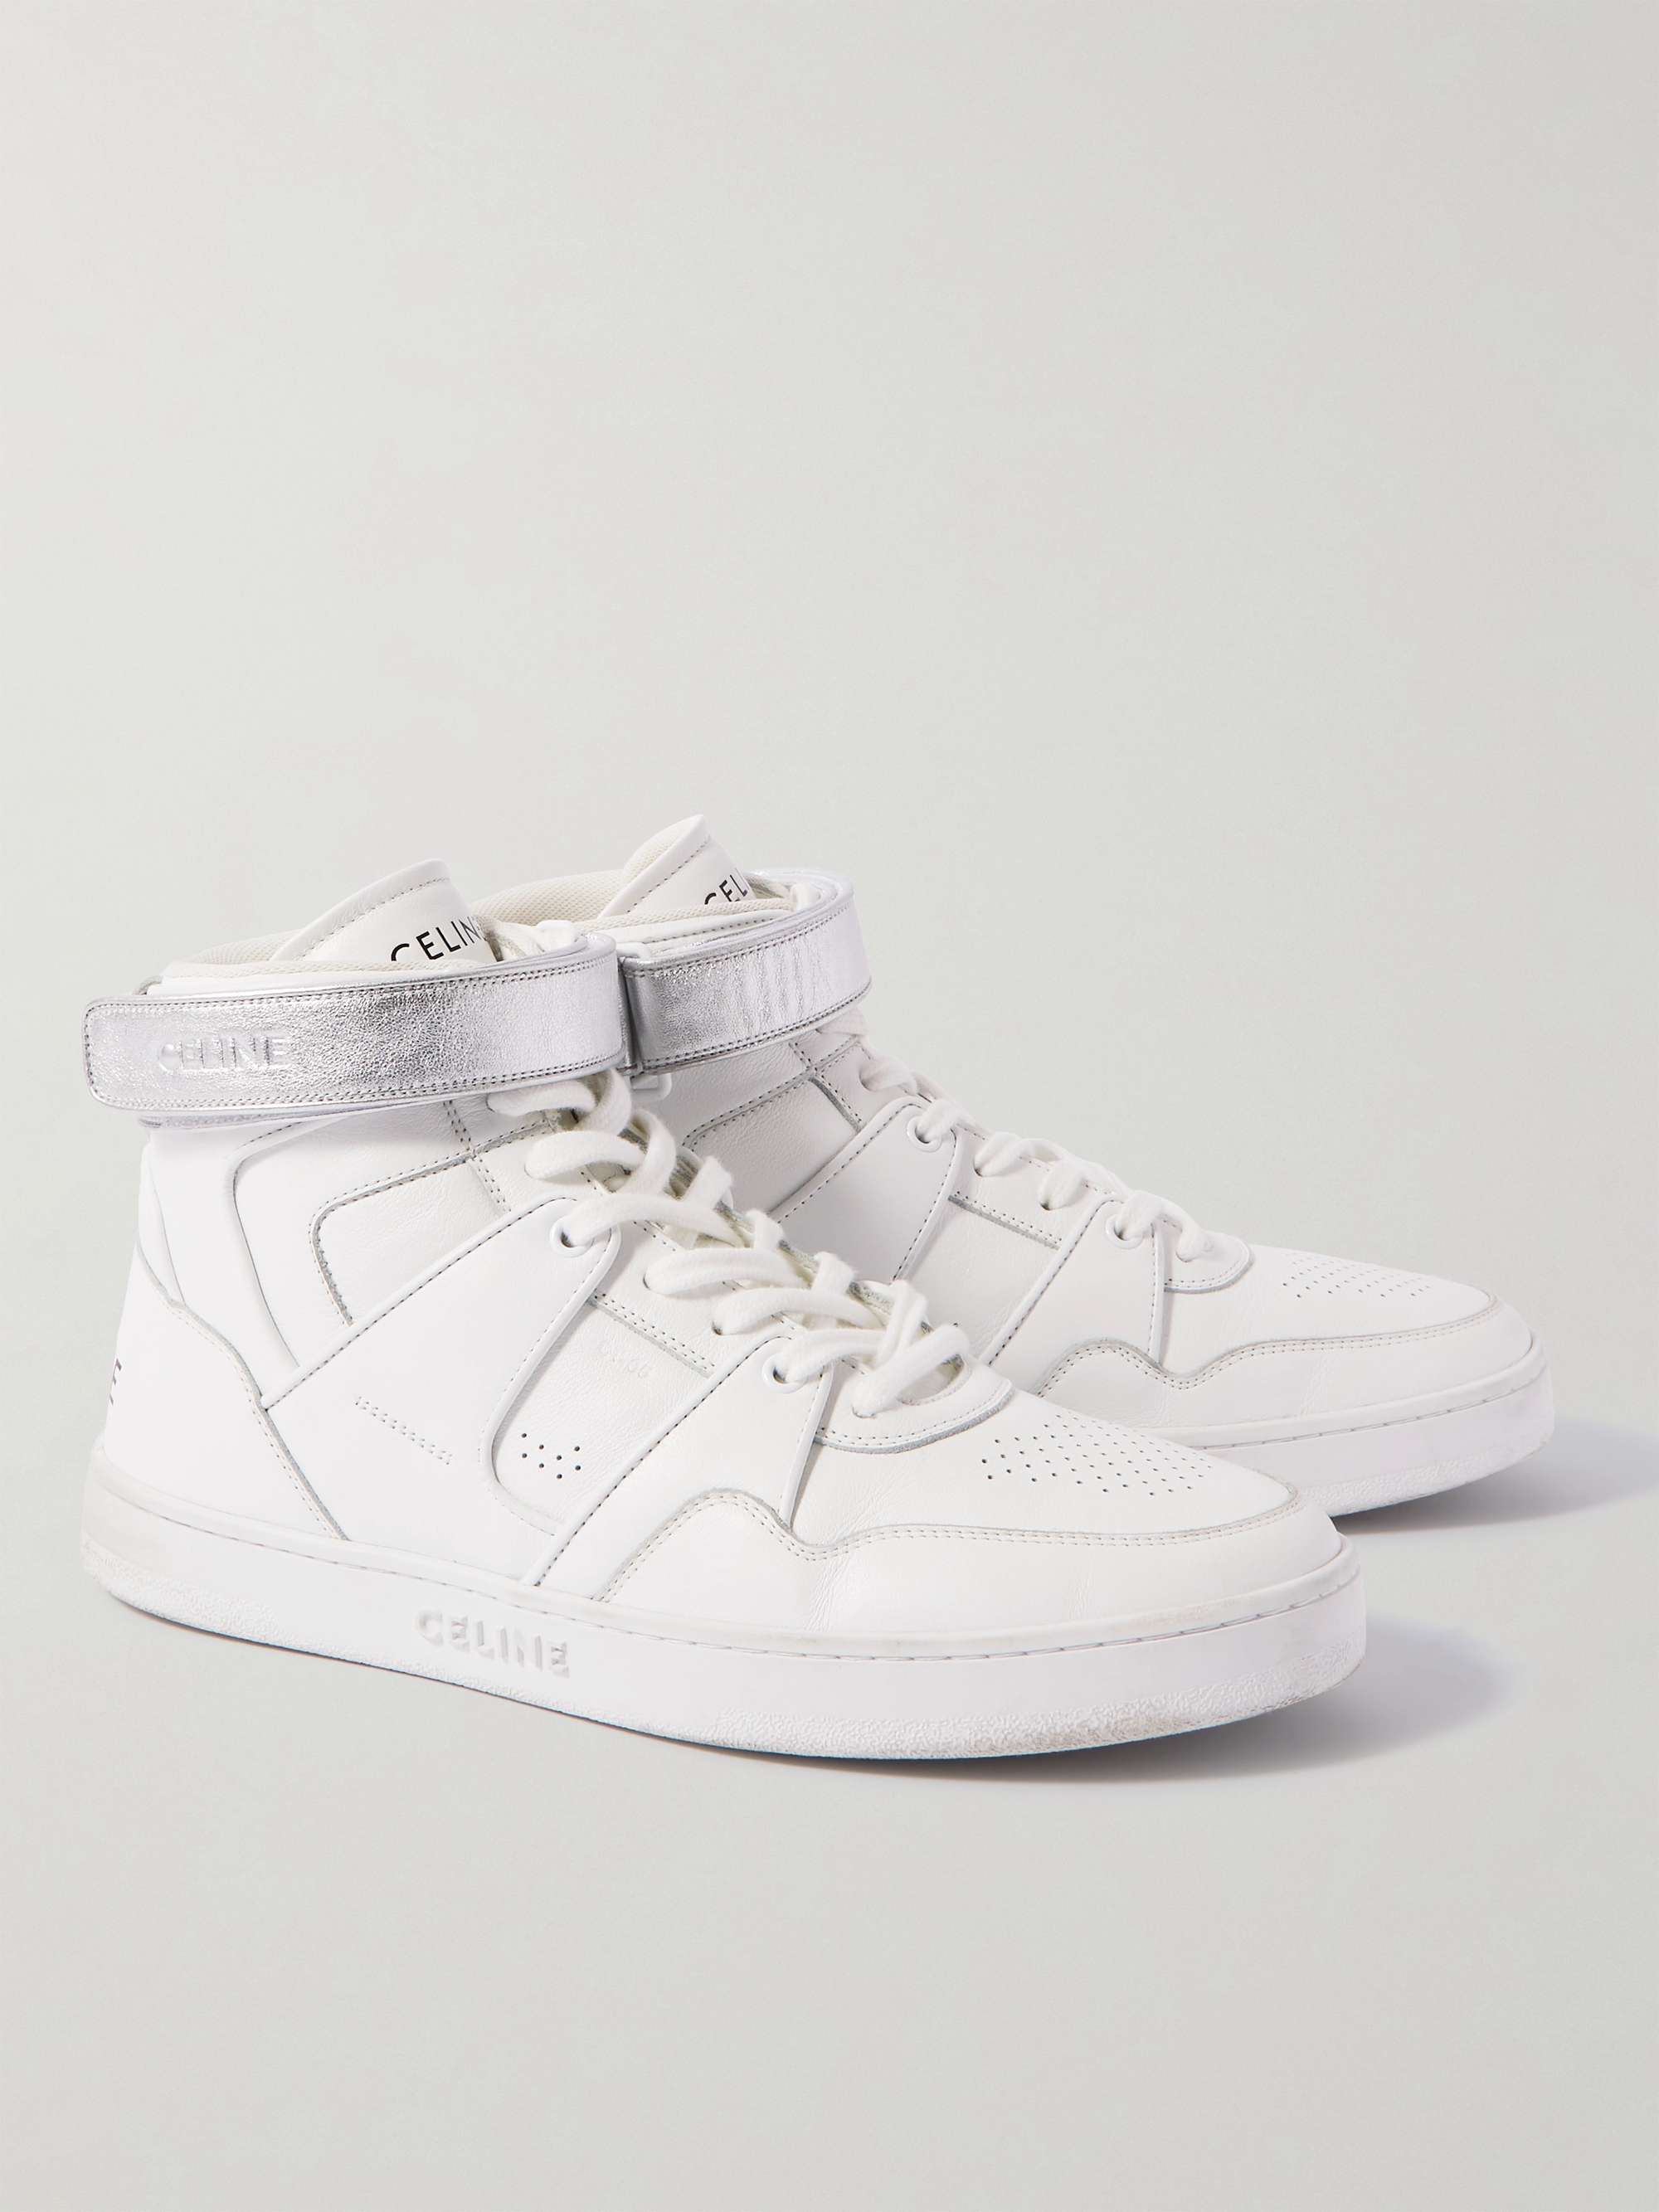 CELINE CT-05 Distressed Leather High-Top Sneakers